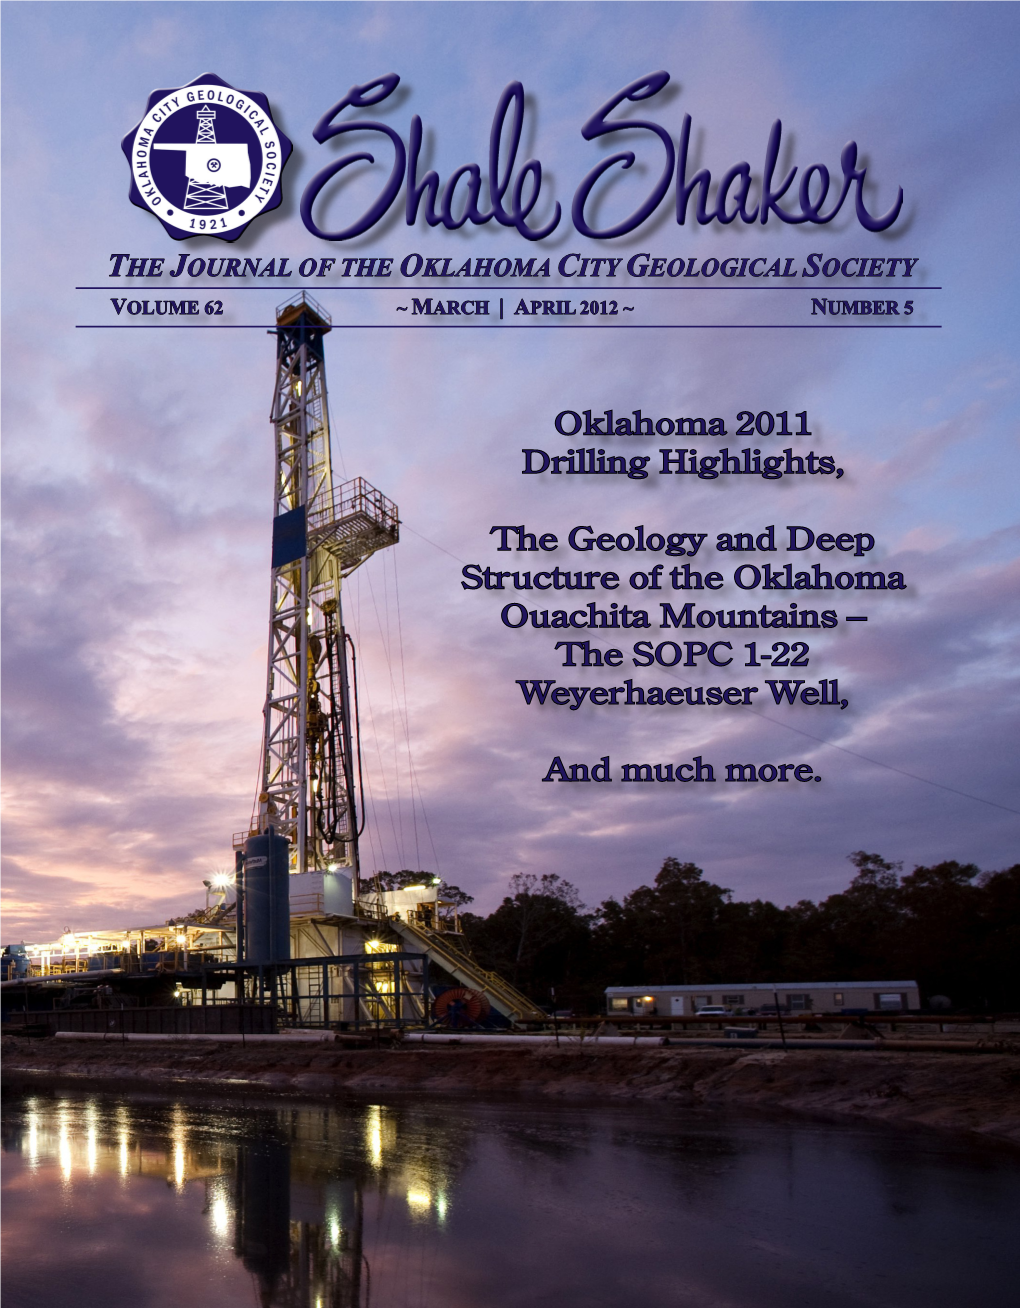 Oklahoma 2011 Drilling Highlights, the Geology and Deep Structure of the Oklahoma Ouachita Mountains